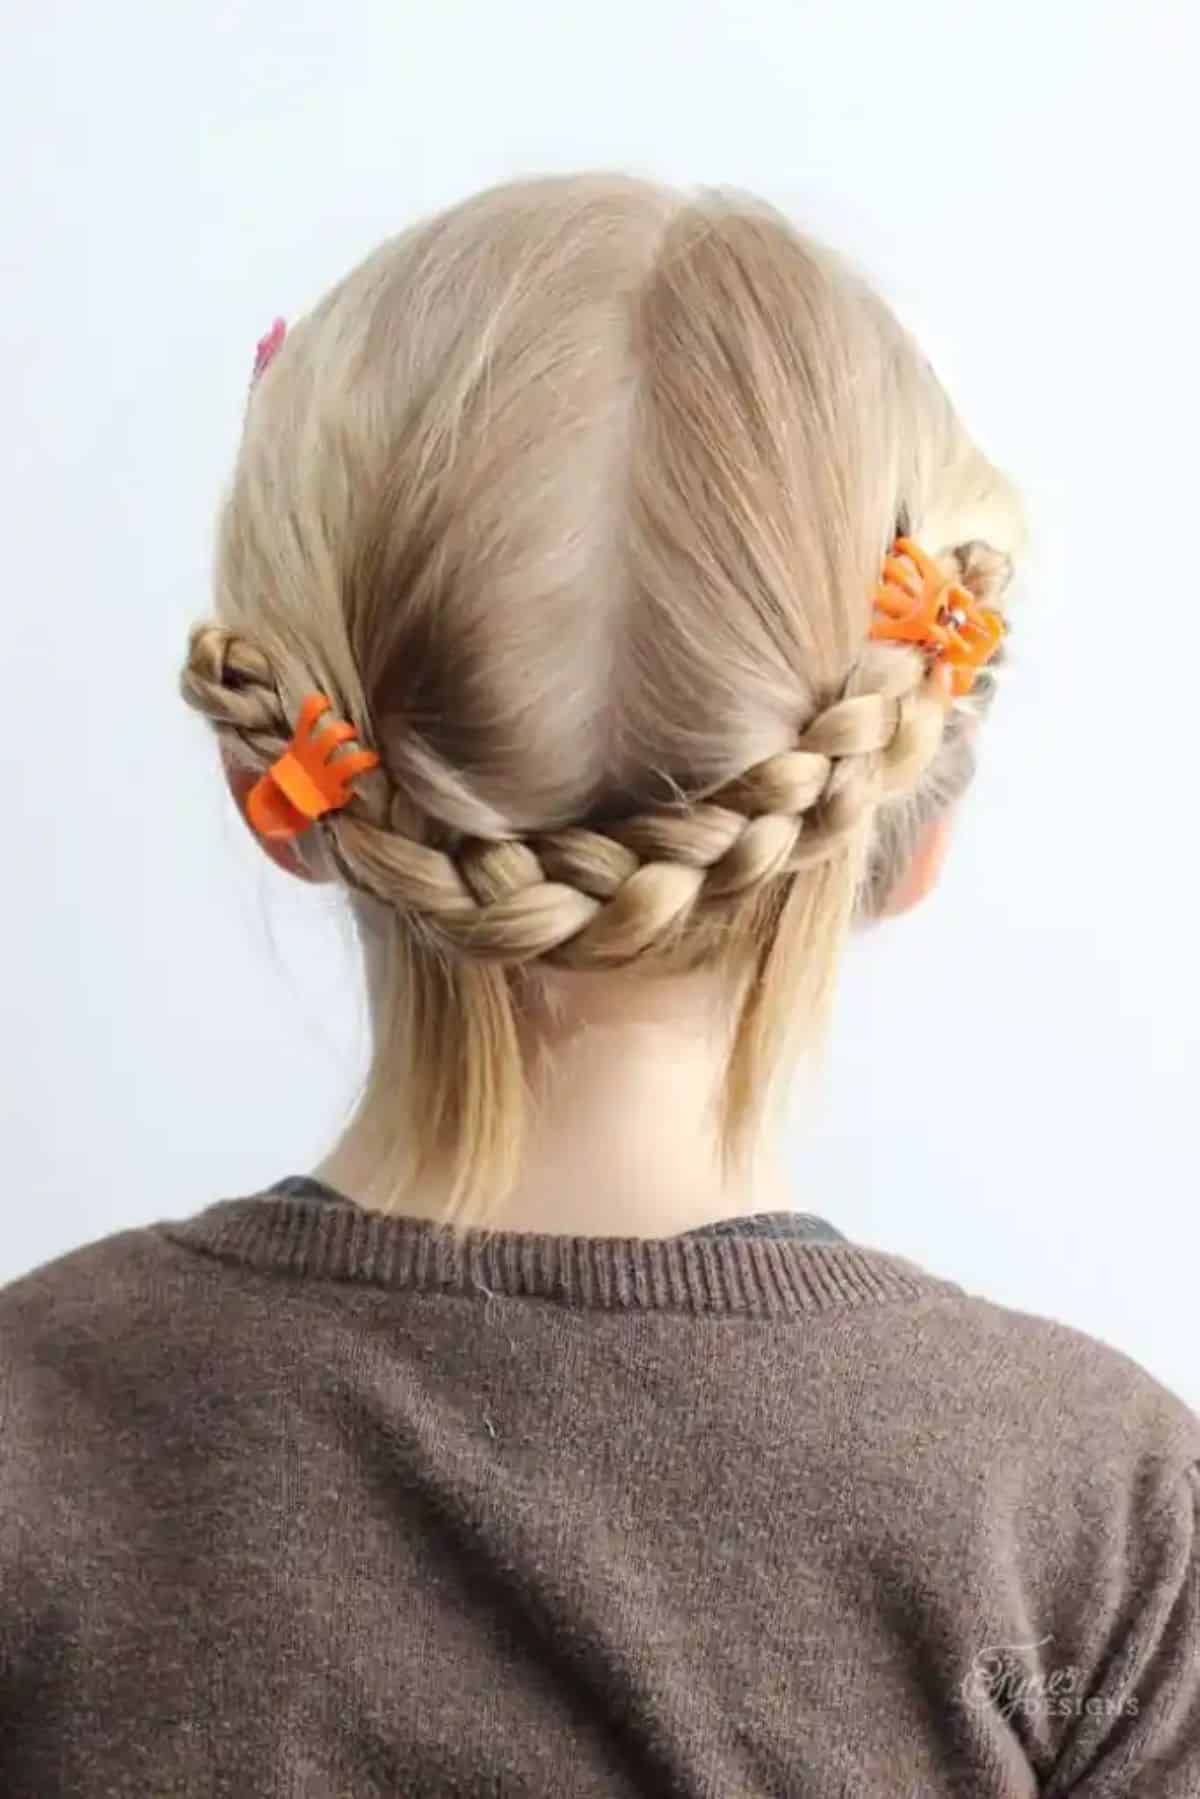 No More Tears! 12 Adorable Hairstyles for Girls - Playtivities